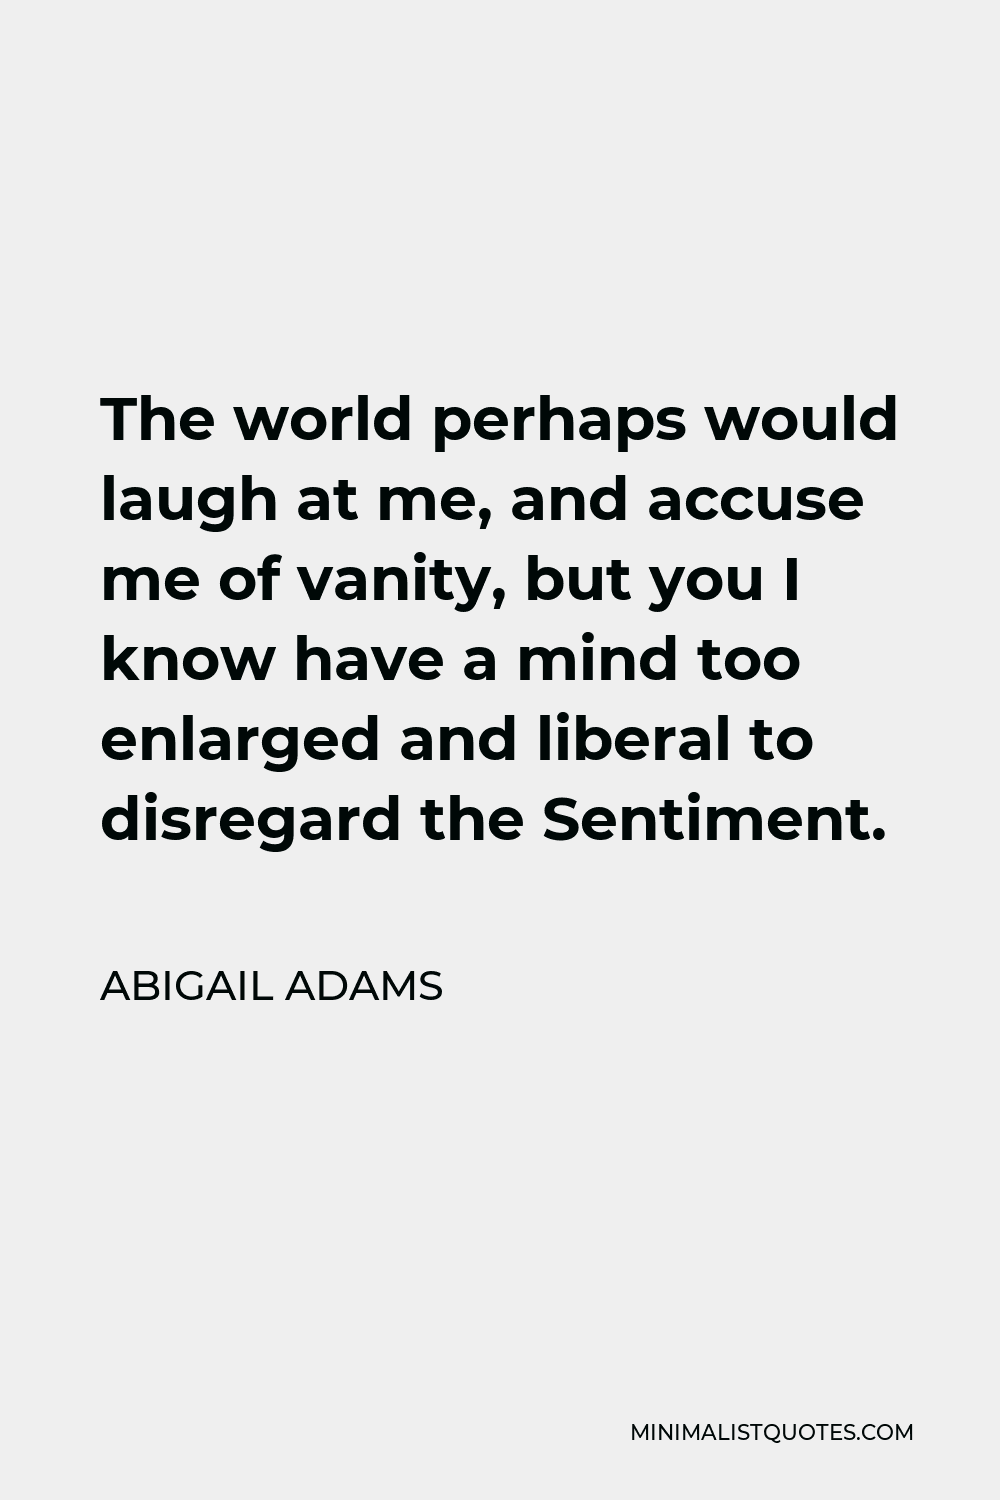 Abigail Adams Quote - The world perhaps would laugh at me, and accuse me of vanity, but you I know have a mind too enlarged and liberal to disregard the Sentiment.